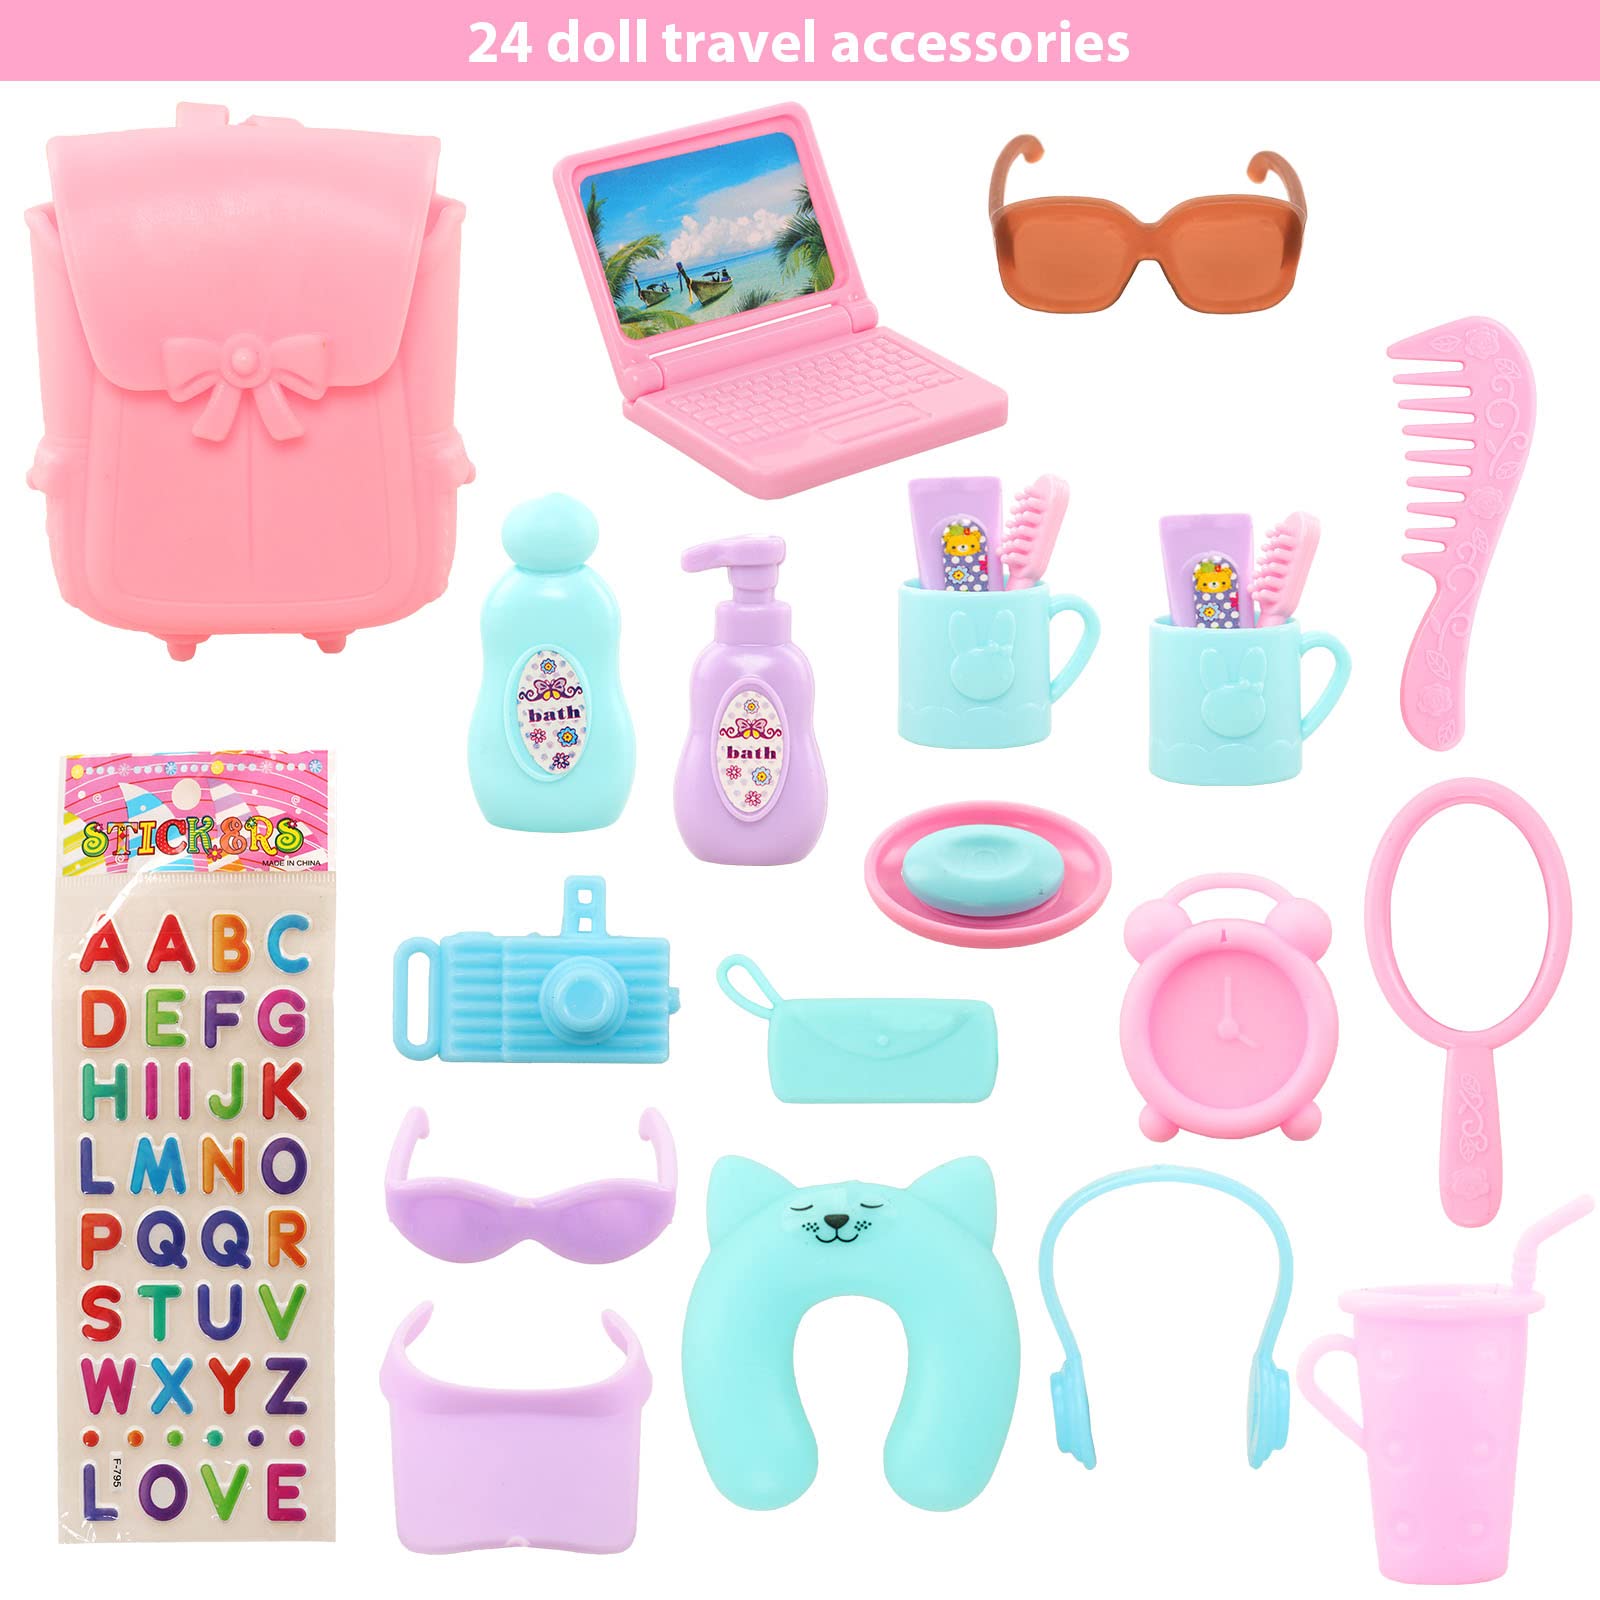 30 Pcs Doll Travel Playset 1 Luggage 1 Backpack 5 Doll Clothes 8 Travel Accessories 12 Toiletries1 Sunglasses for 11.5 Inch Girl Doll(Doll NOT Include)